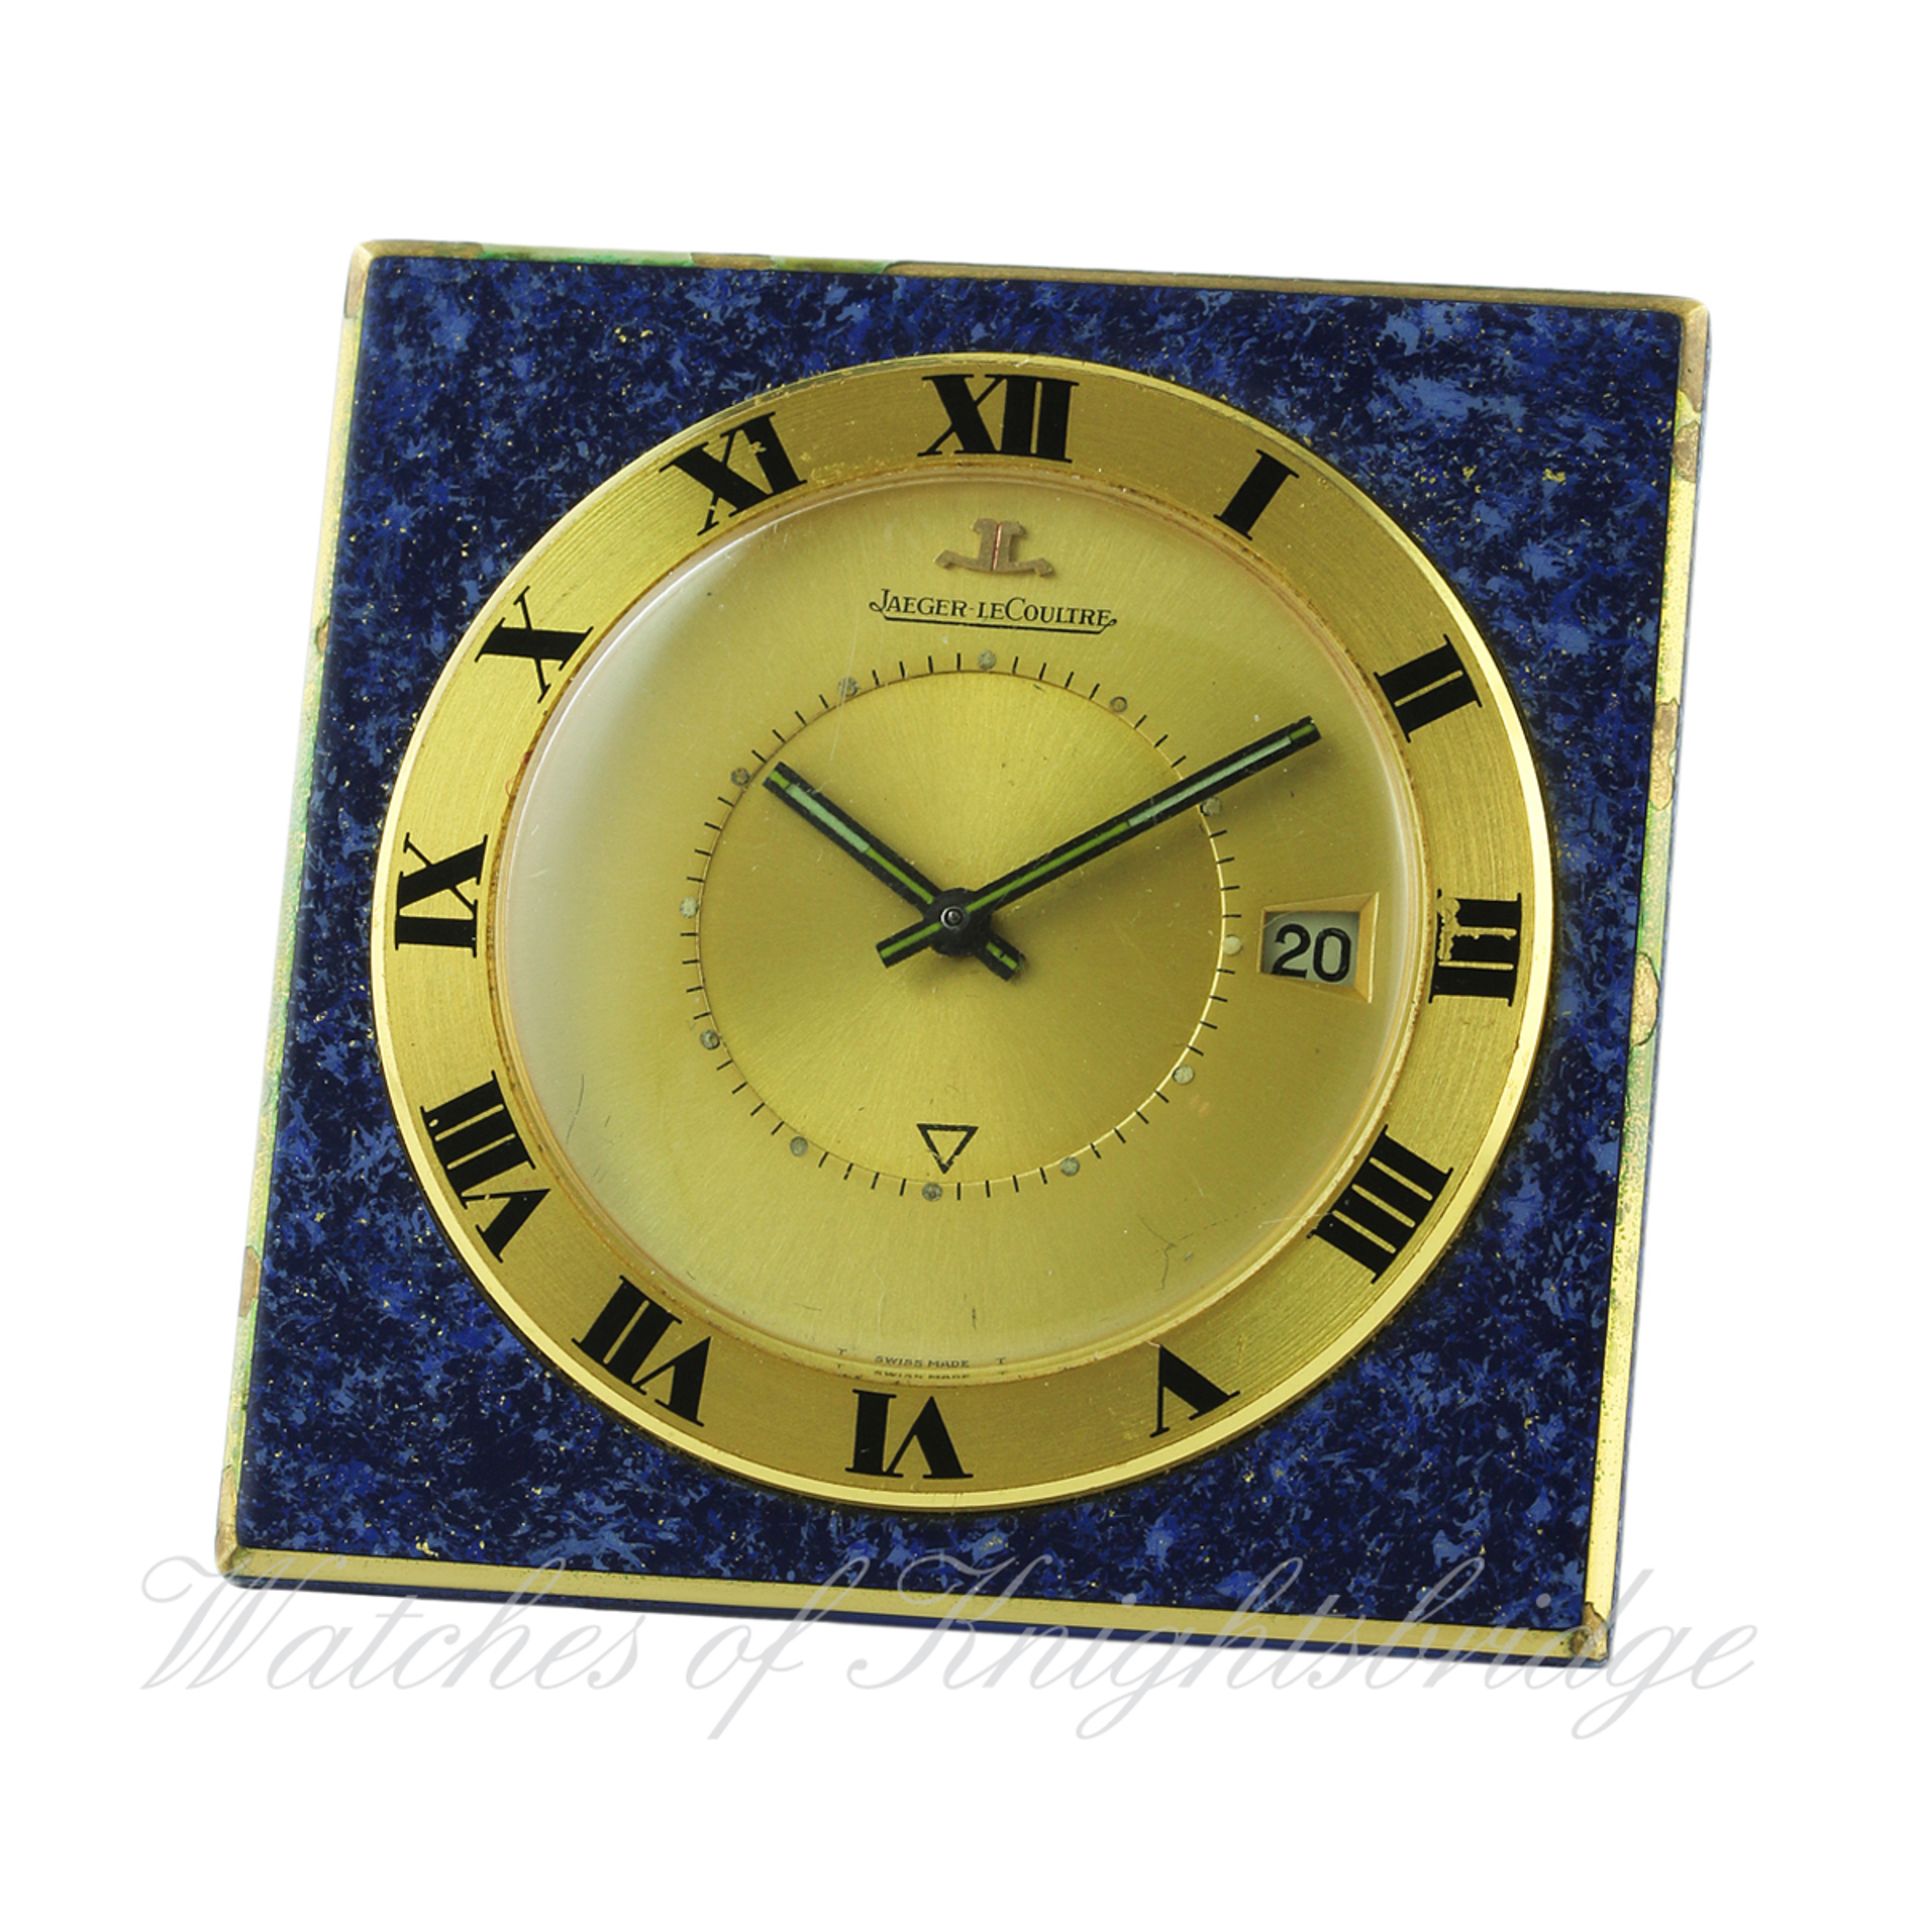 A GILT METAL LACQUERED JAEGER LECOULTRE ALARM TRAVEL CLOCK CIRCA 1970 IN ORIGINAL JLC POUCH
D: Two